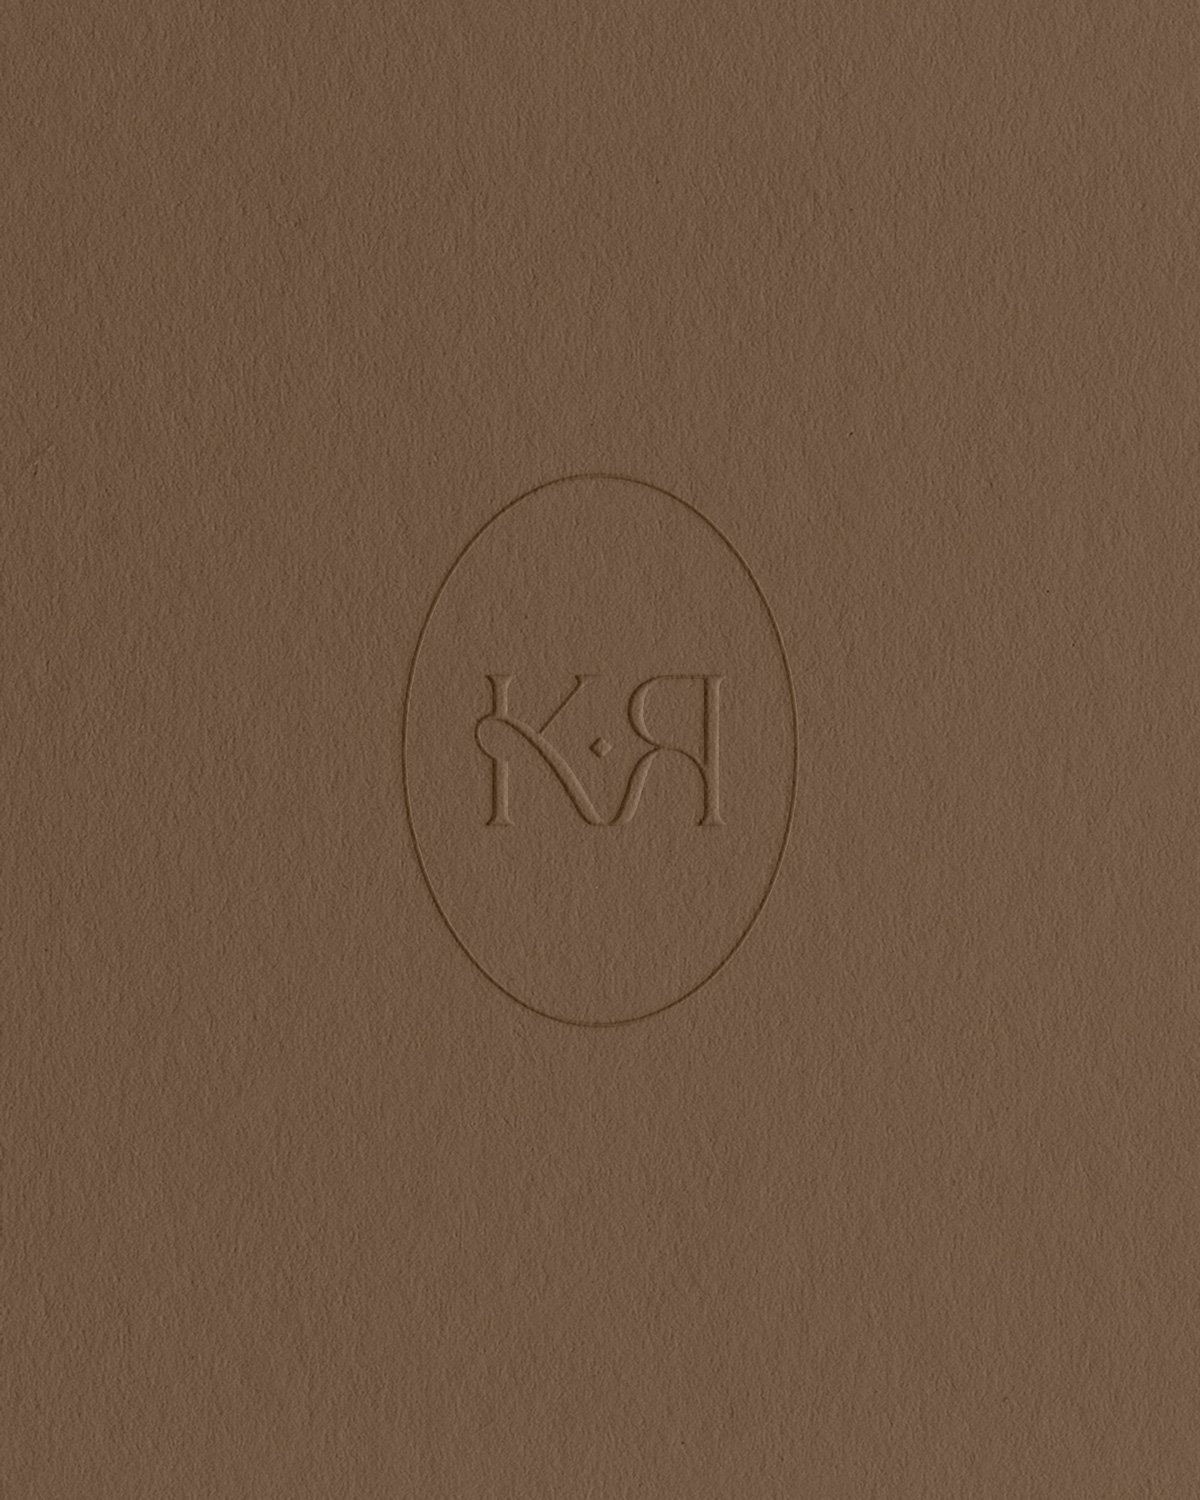 Brand Mark with letters KR for Kalon Rouge blind embossed on brown textured paper